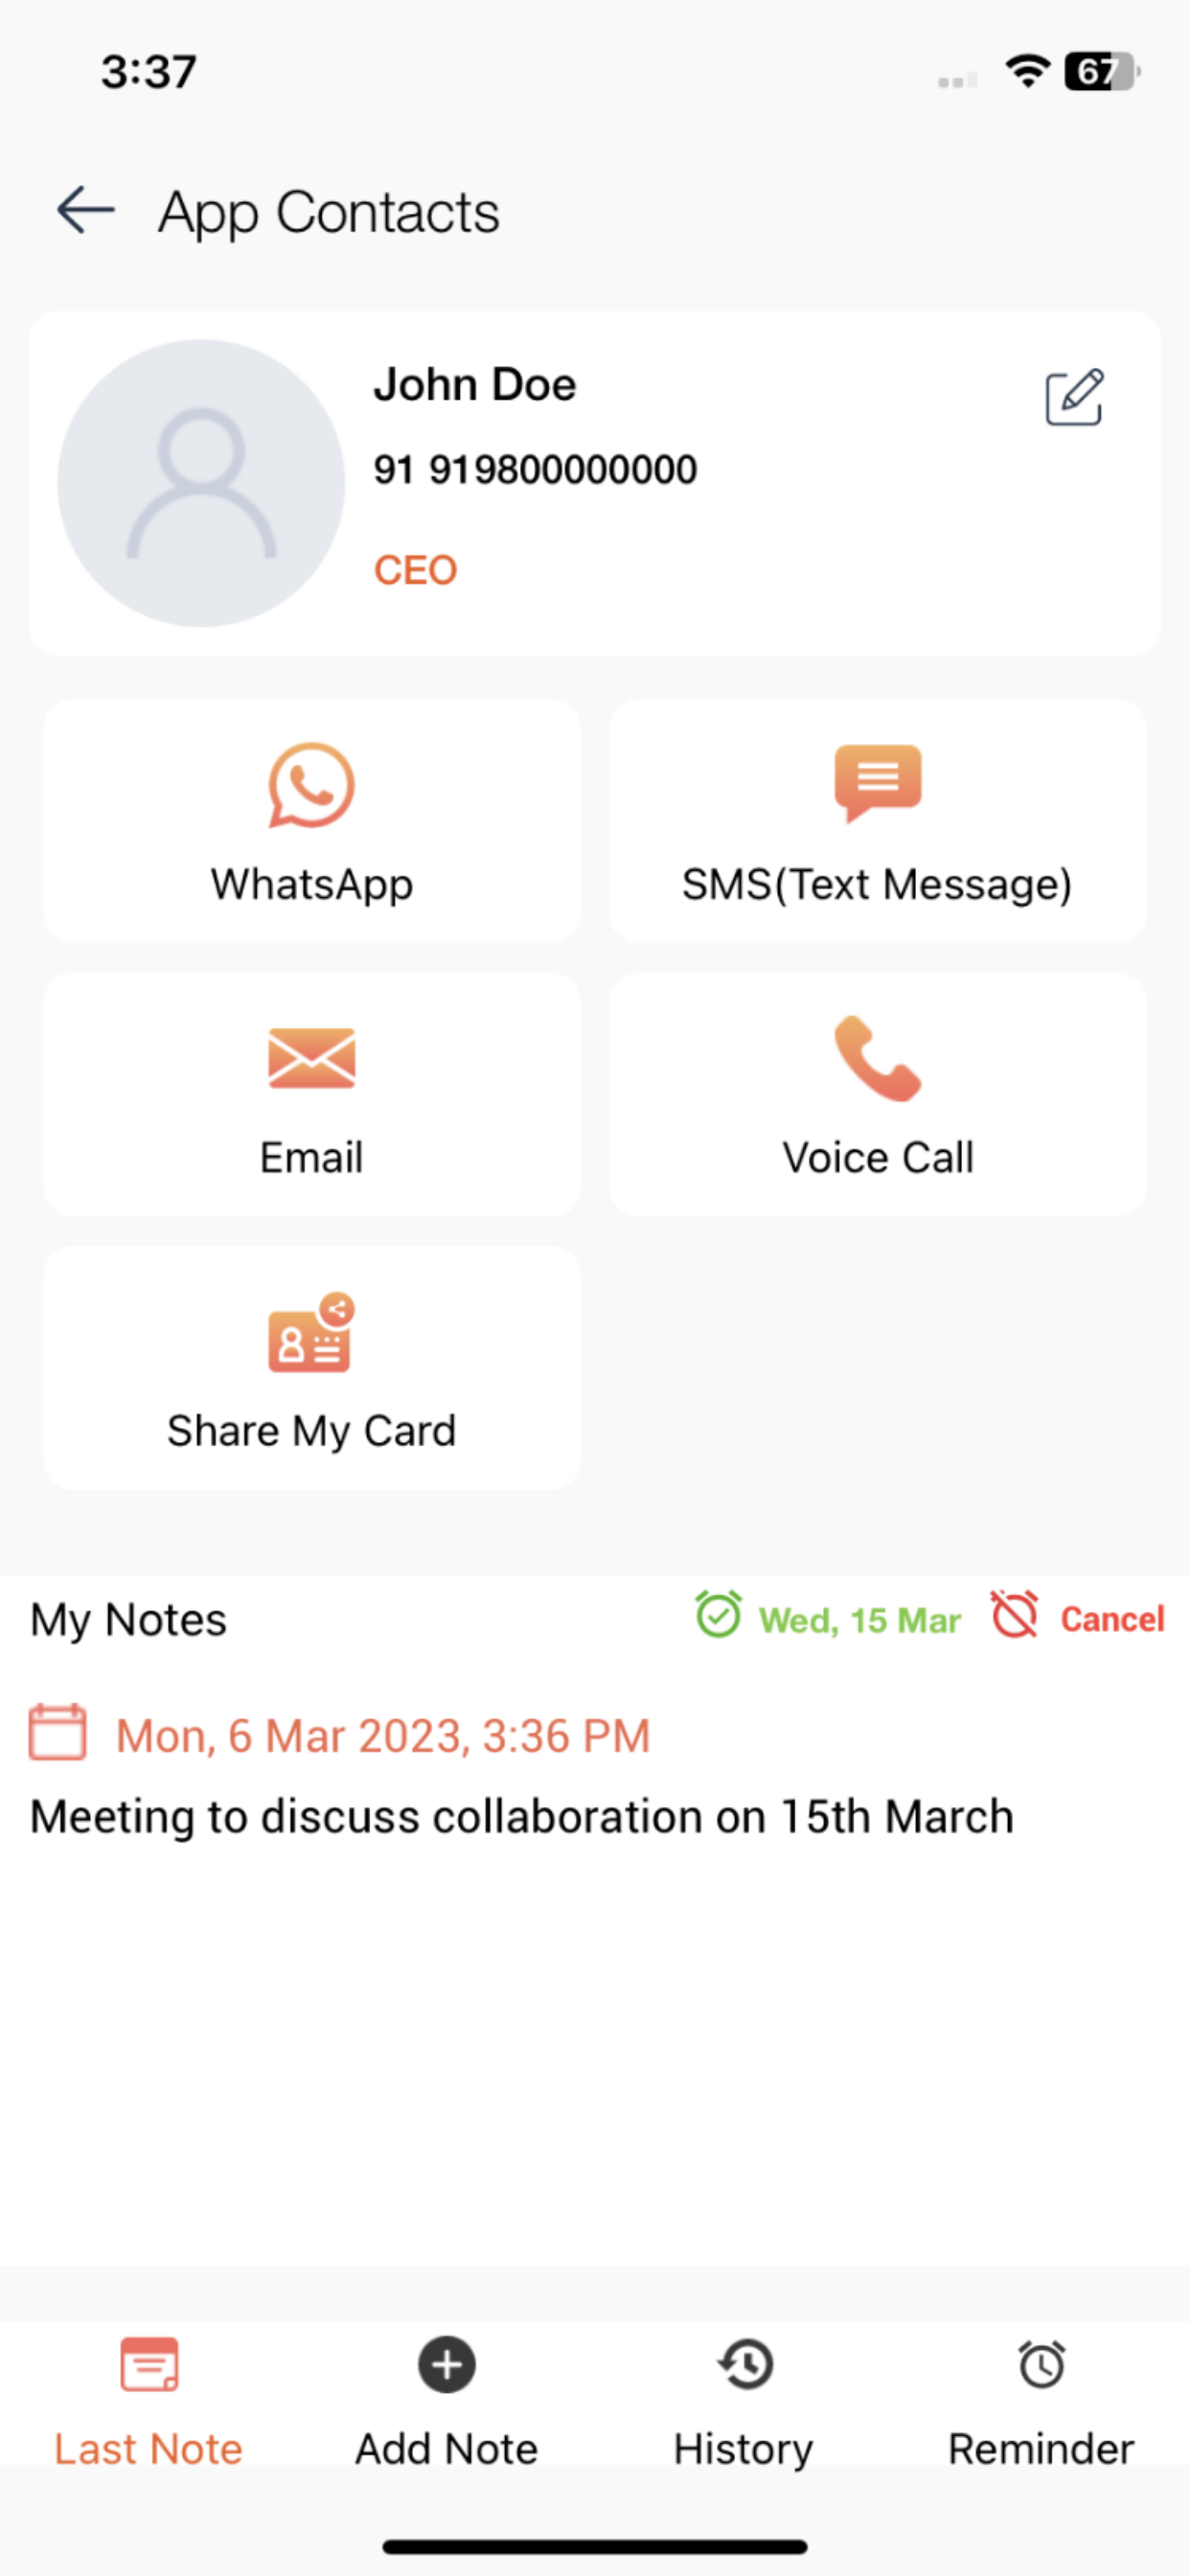 Connect on WhatsApp, SMS, Email, and Voice Call